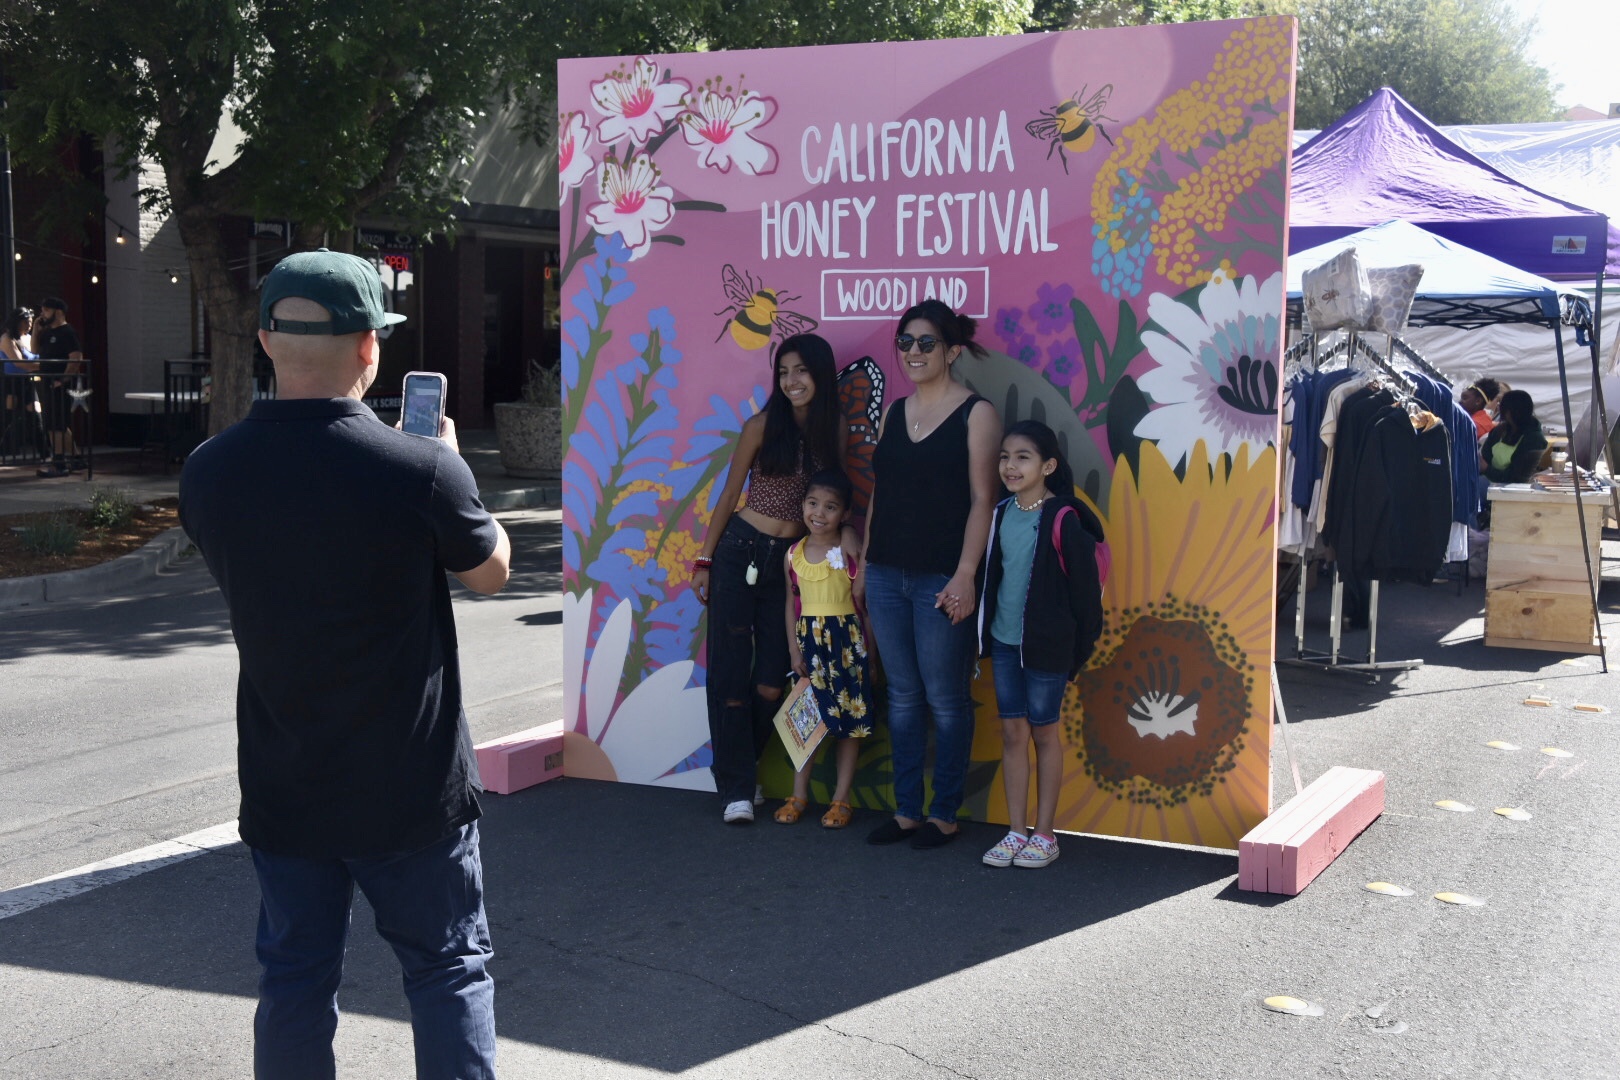 family taking a photo in front of California Honey Festival sign